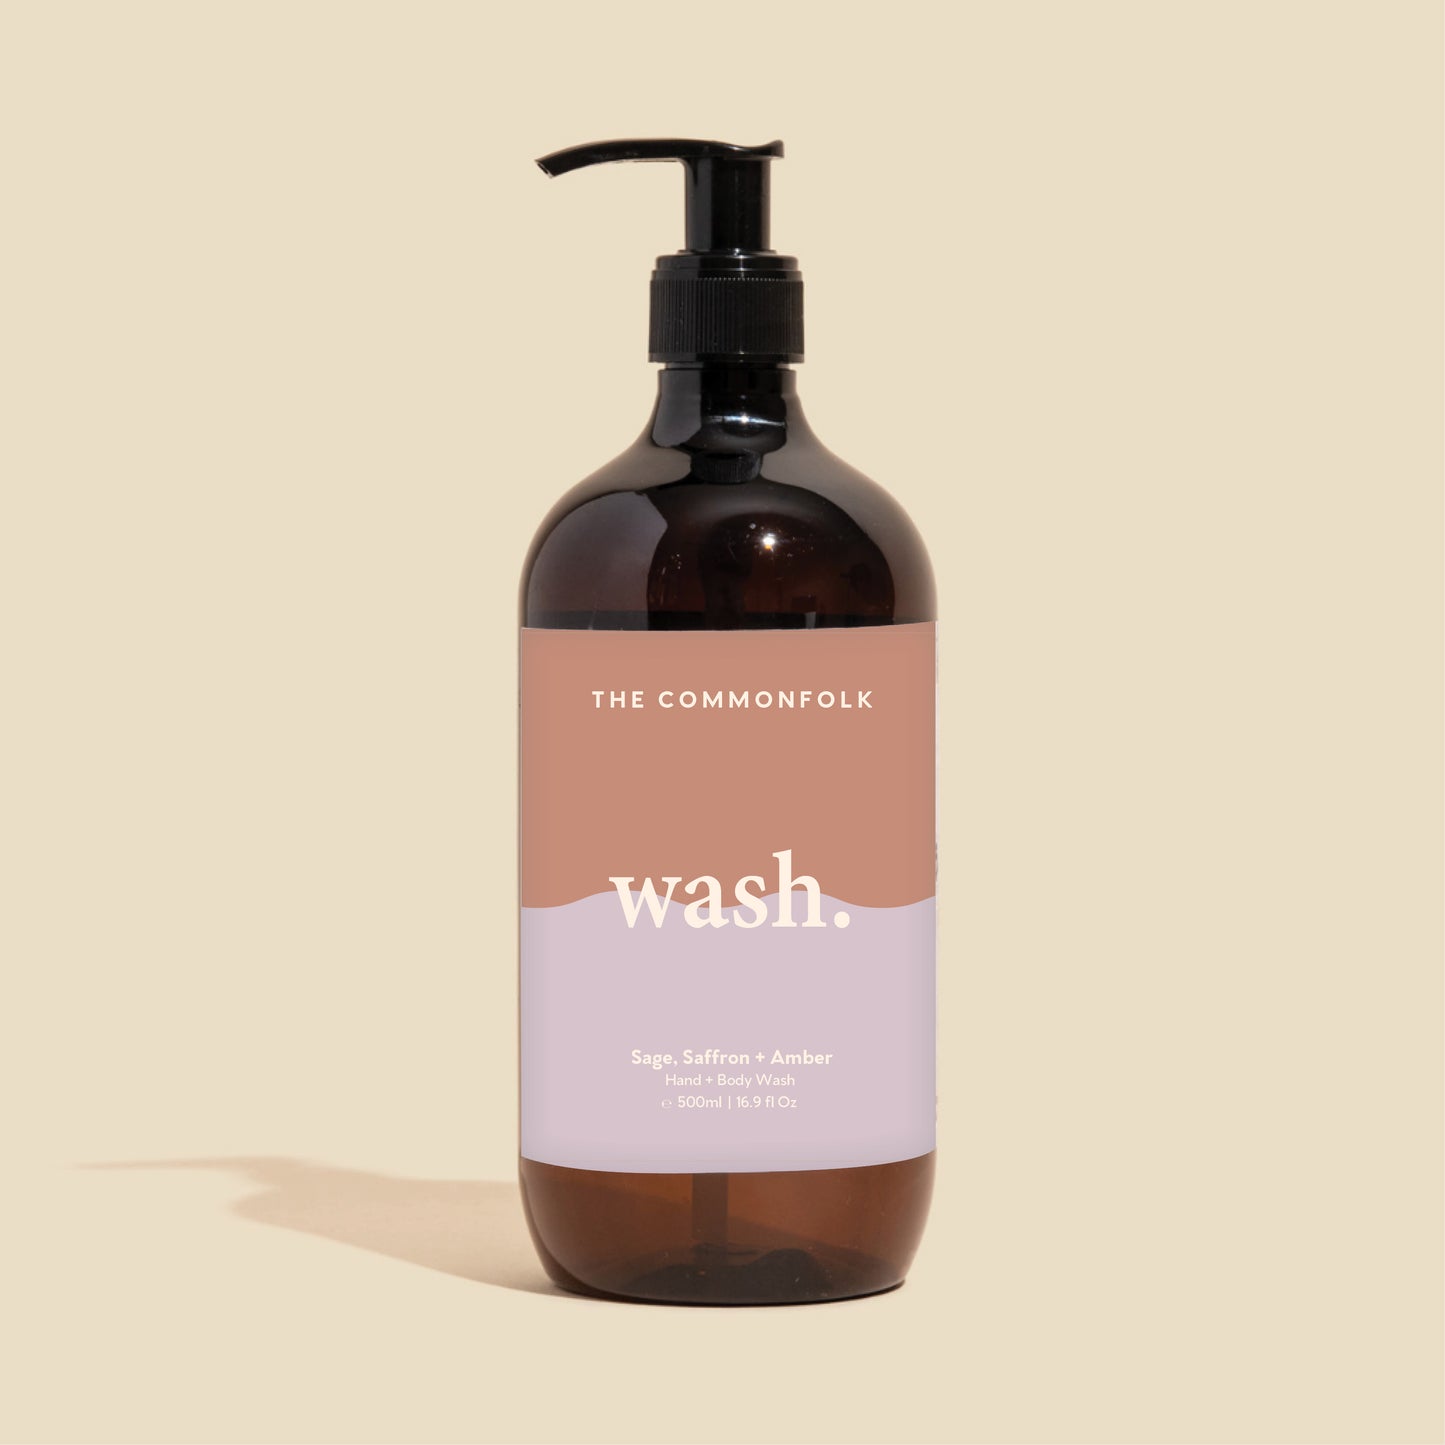 Hand + Body Wash - Waves / Rose